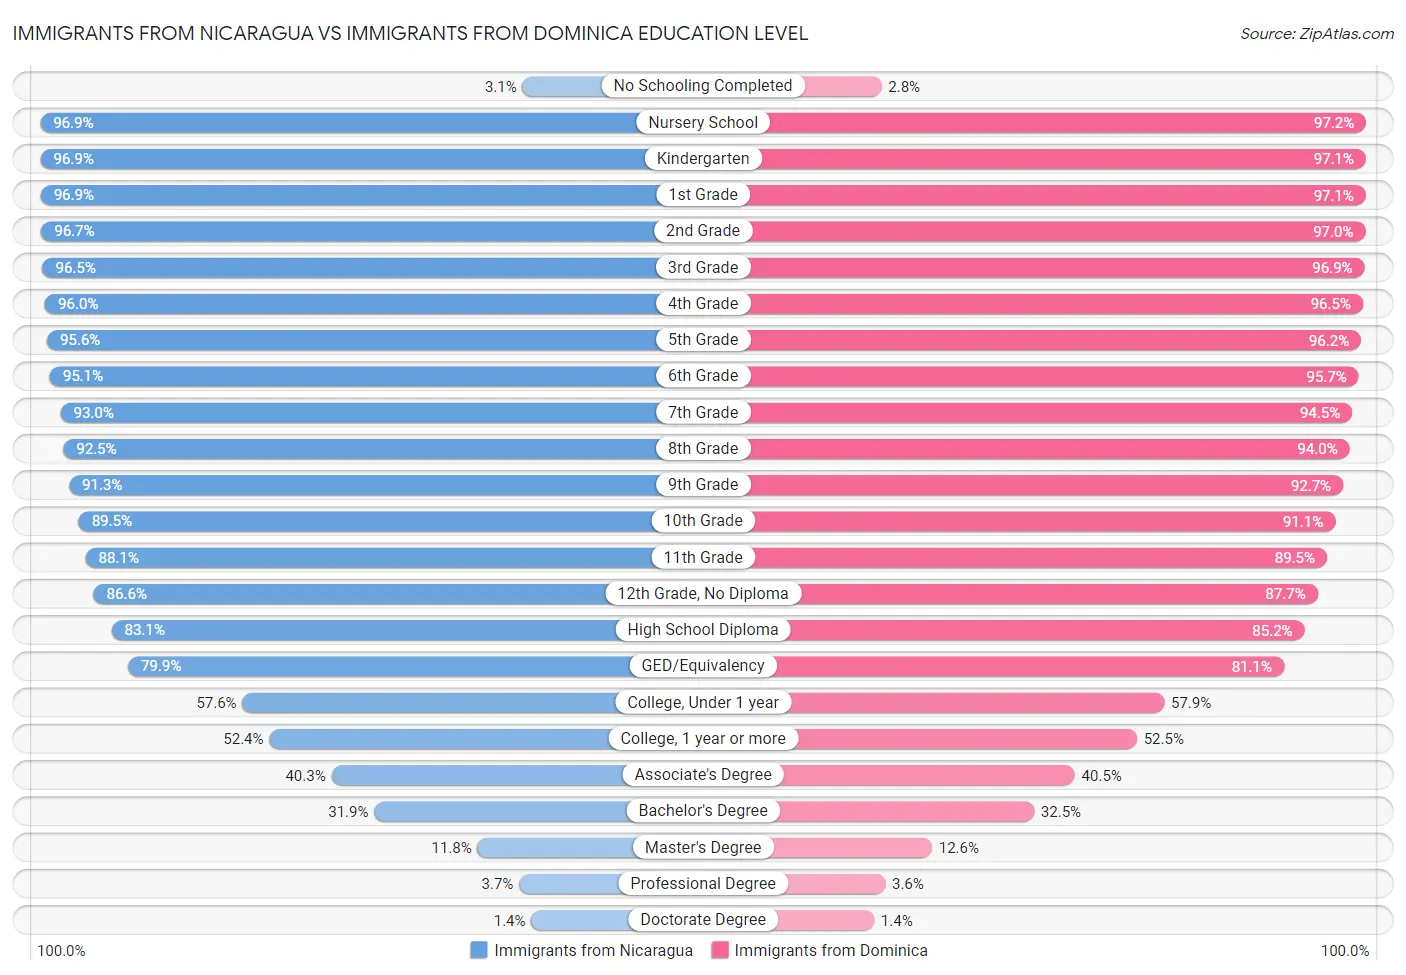 Immigrants from Nicaragua vs Immigrants from Dominica Education Level